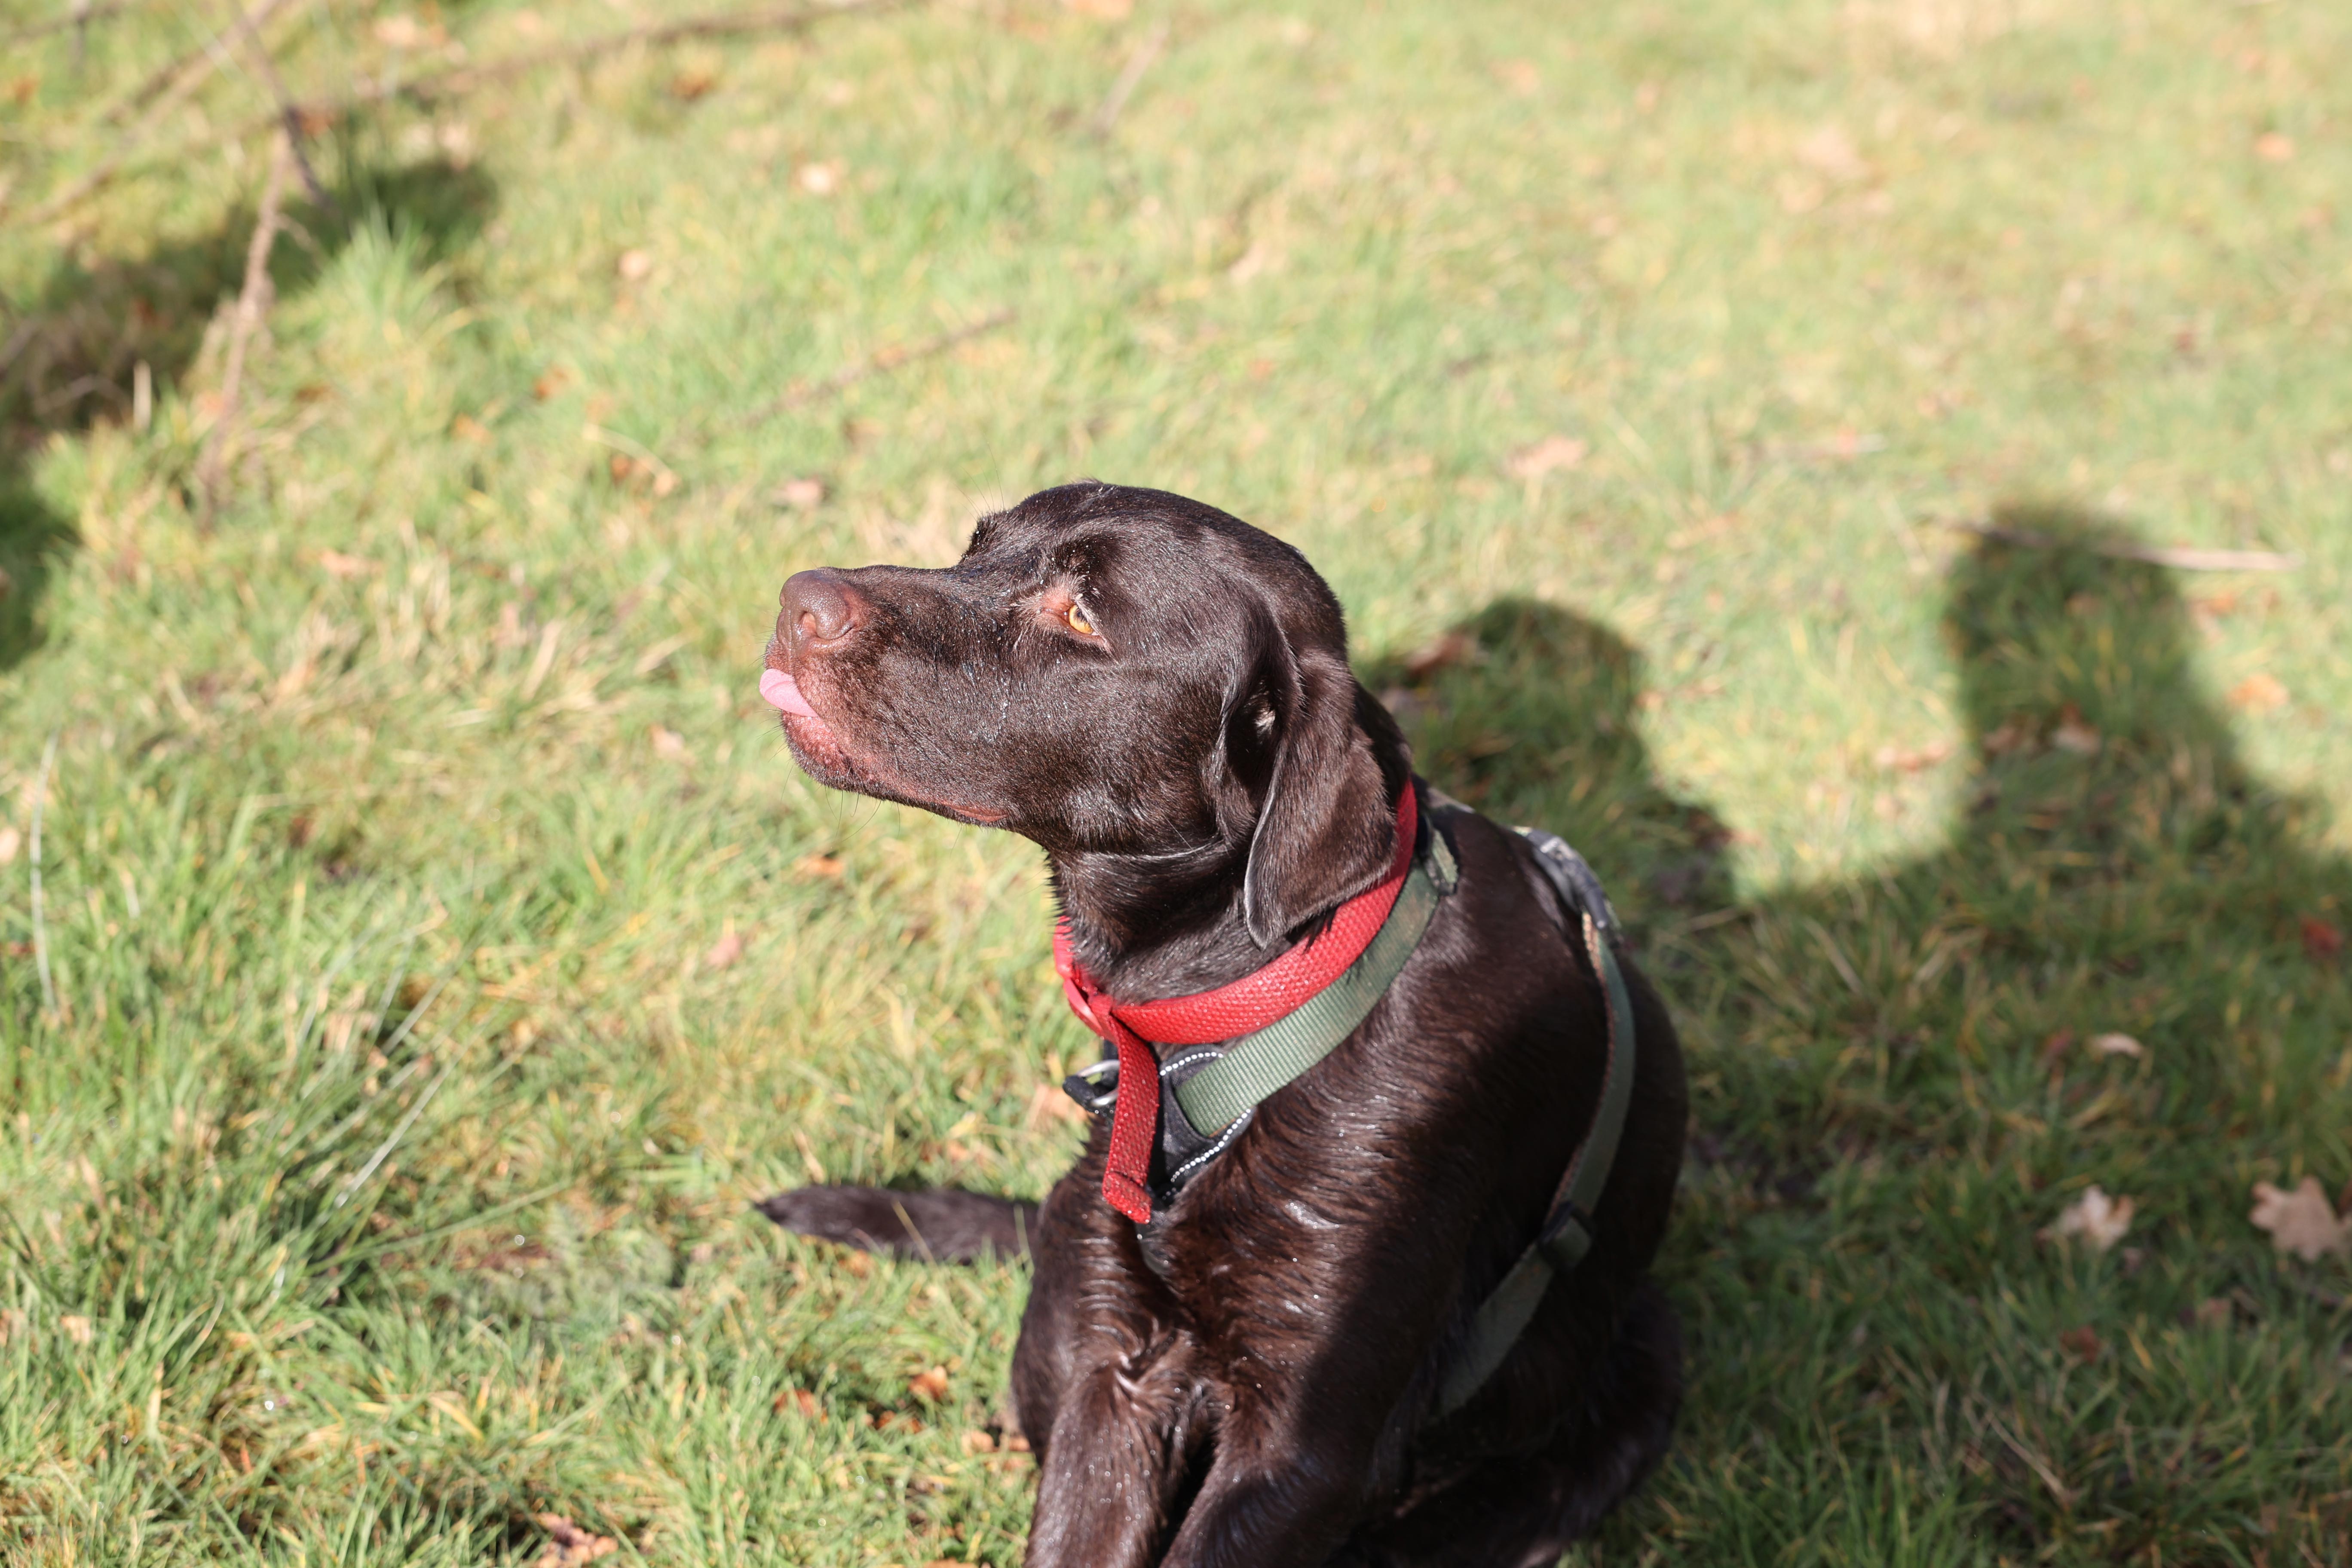 A shot taken with the Canon EOS R6 mirrorless camera. It shows a chocolate Labrador sitting with his tongue out.